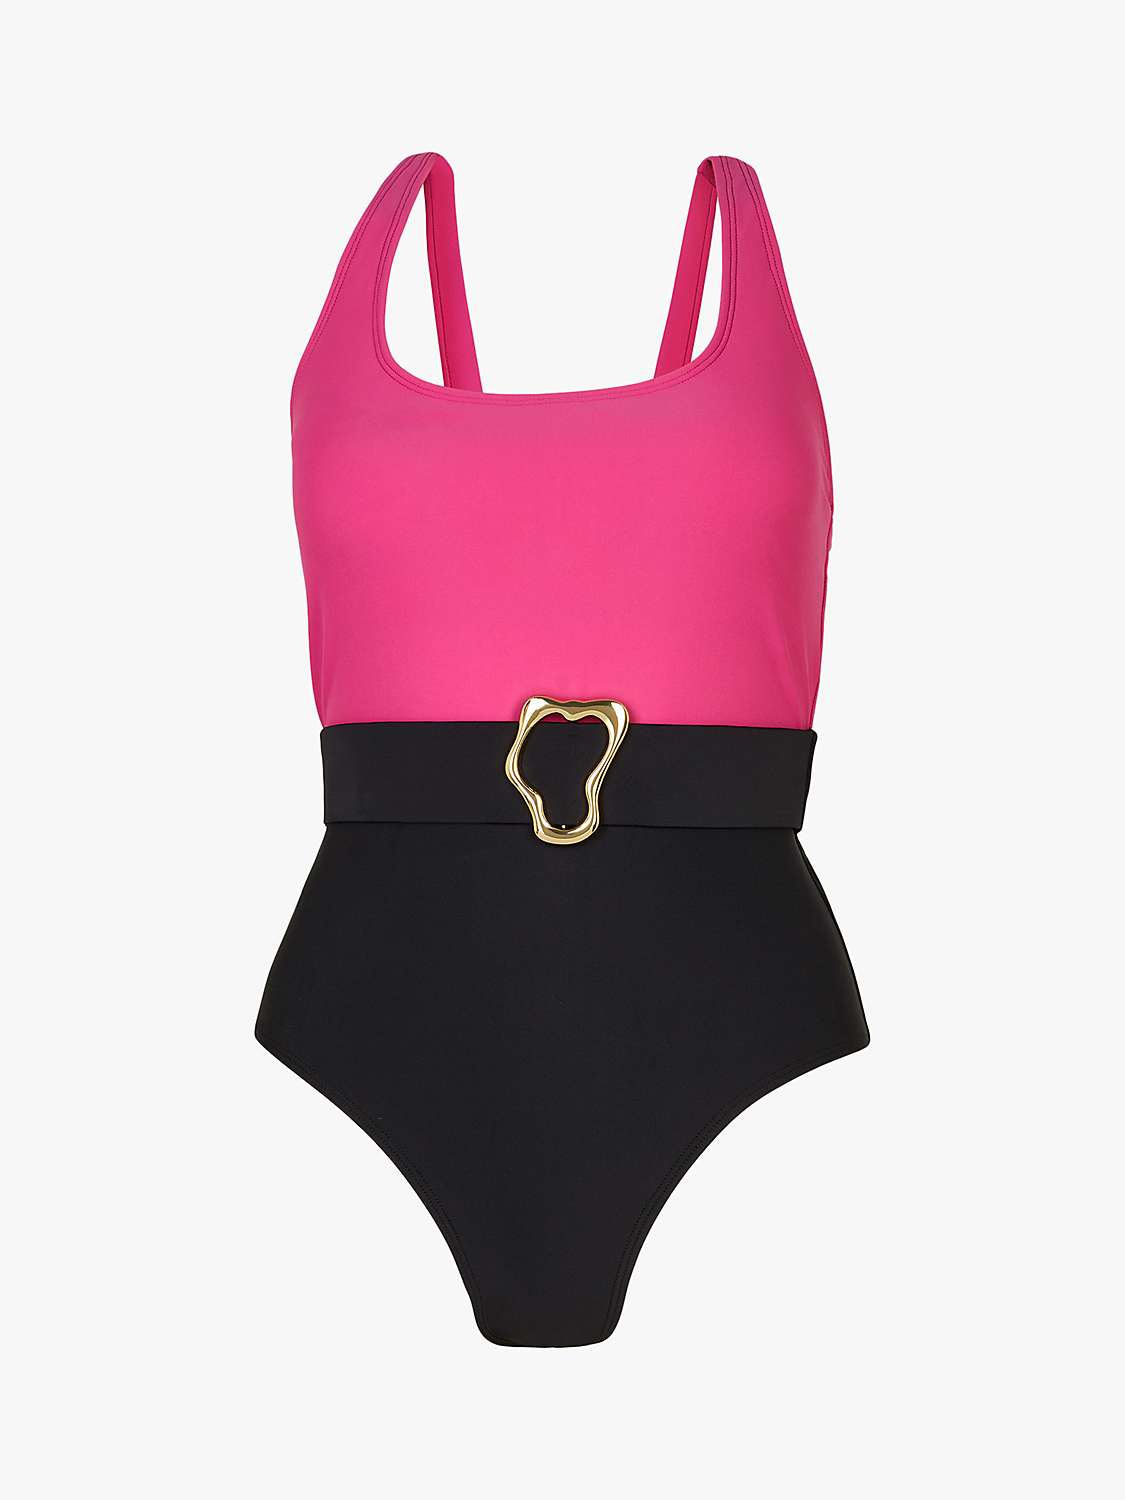 Buy Accessorize Colour Block Belted Swimsuit, Pink/Multi Online at johnlewis.com